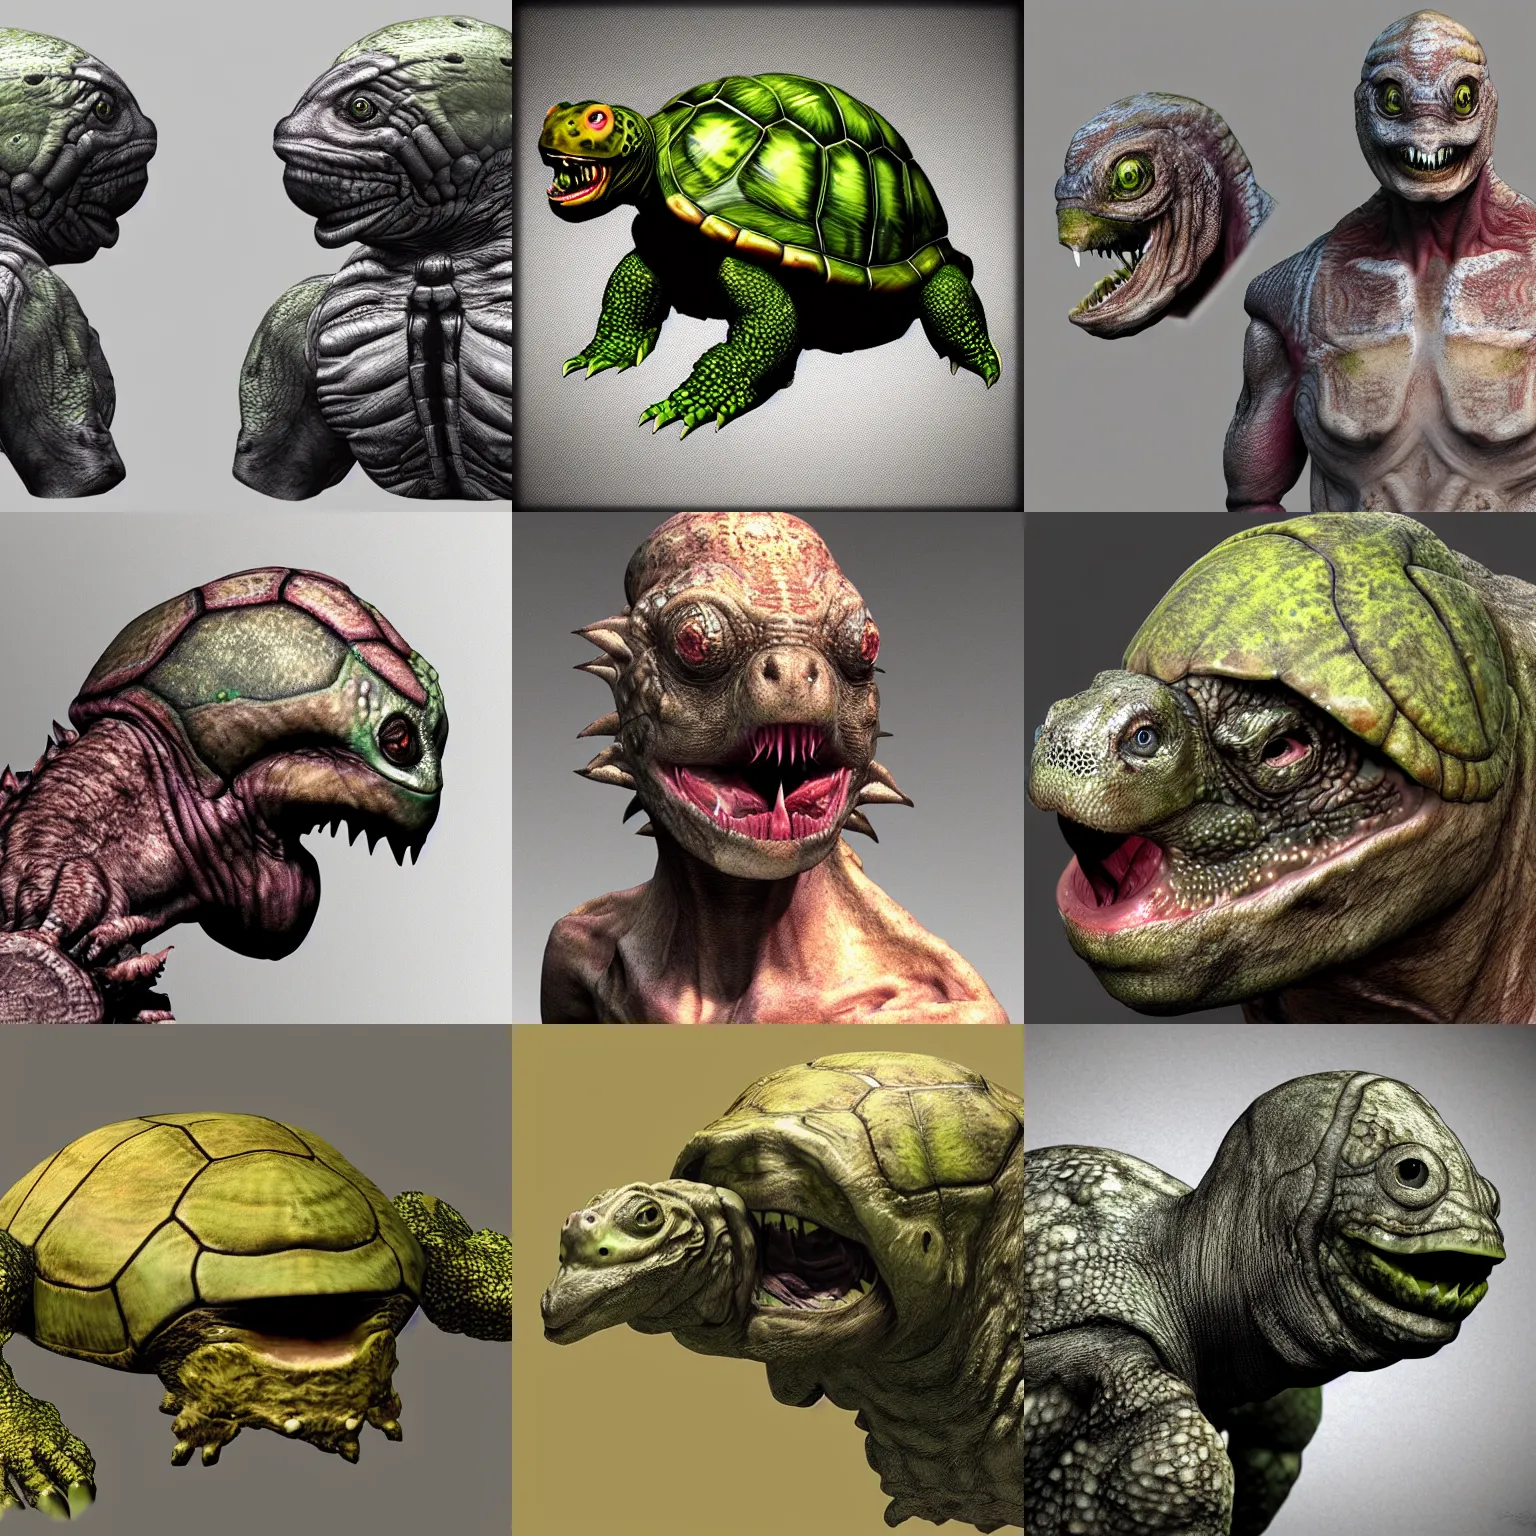 Prompt: humanoid turtle monster, photorealistic, grimdark, gruesome, front view, side view